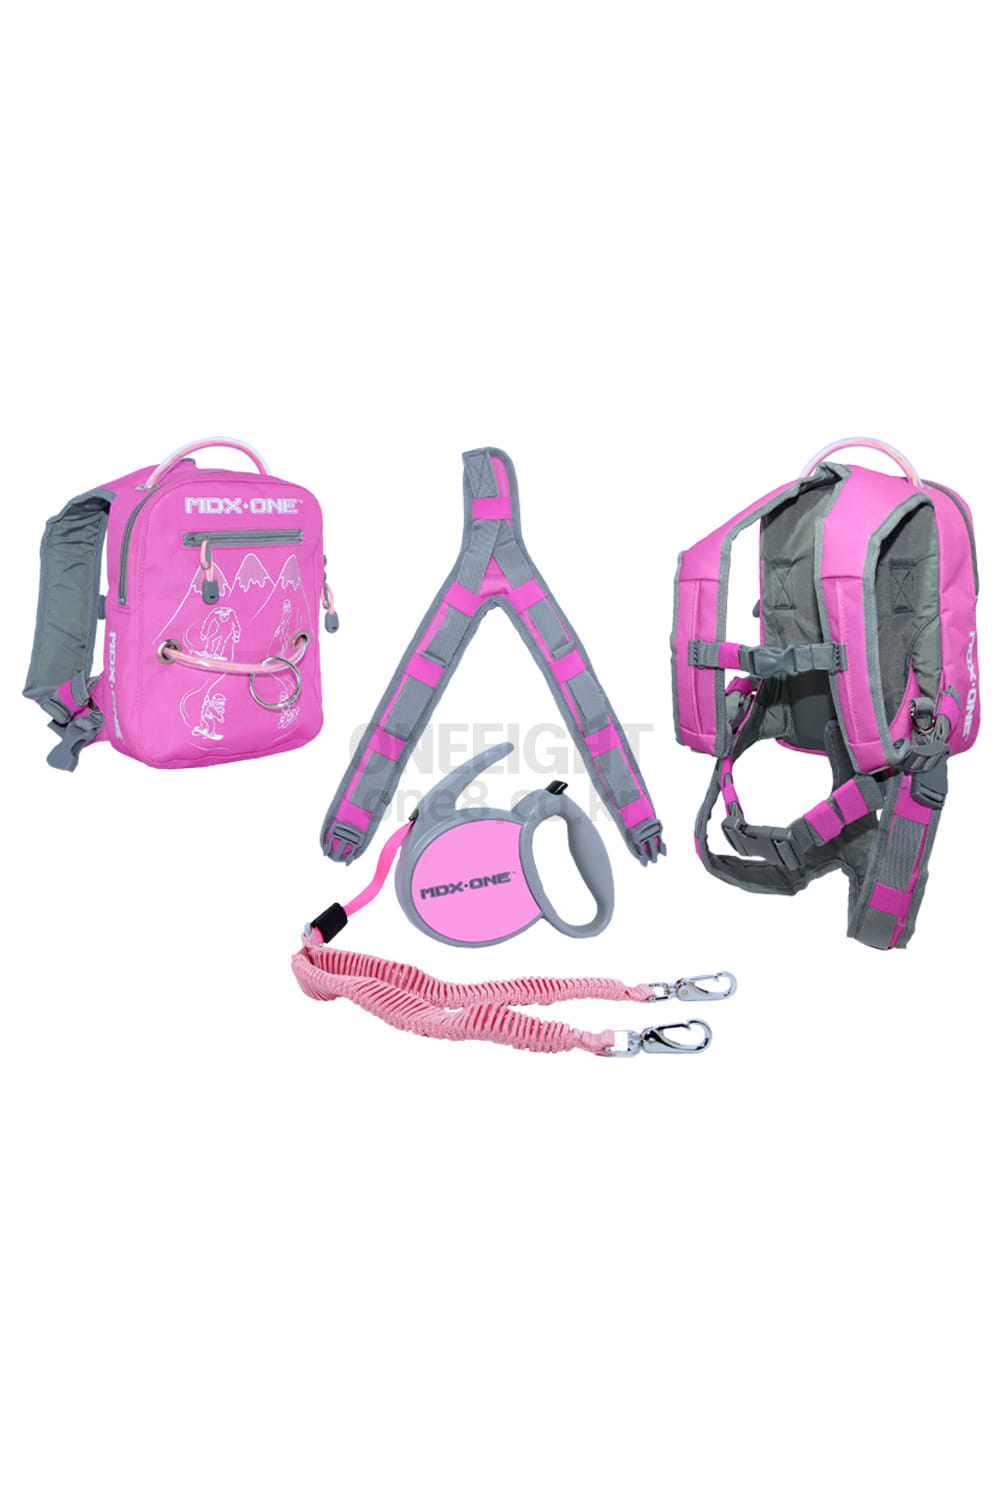 2324 MDX ONE 키즈 하네스 리쉬 백팩 보드용 2324 MDX ONE_OX SNOWBOARD/SKI BACKPACK WITH RETRACTABLE ROPE_PINK_DF9M302PK